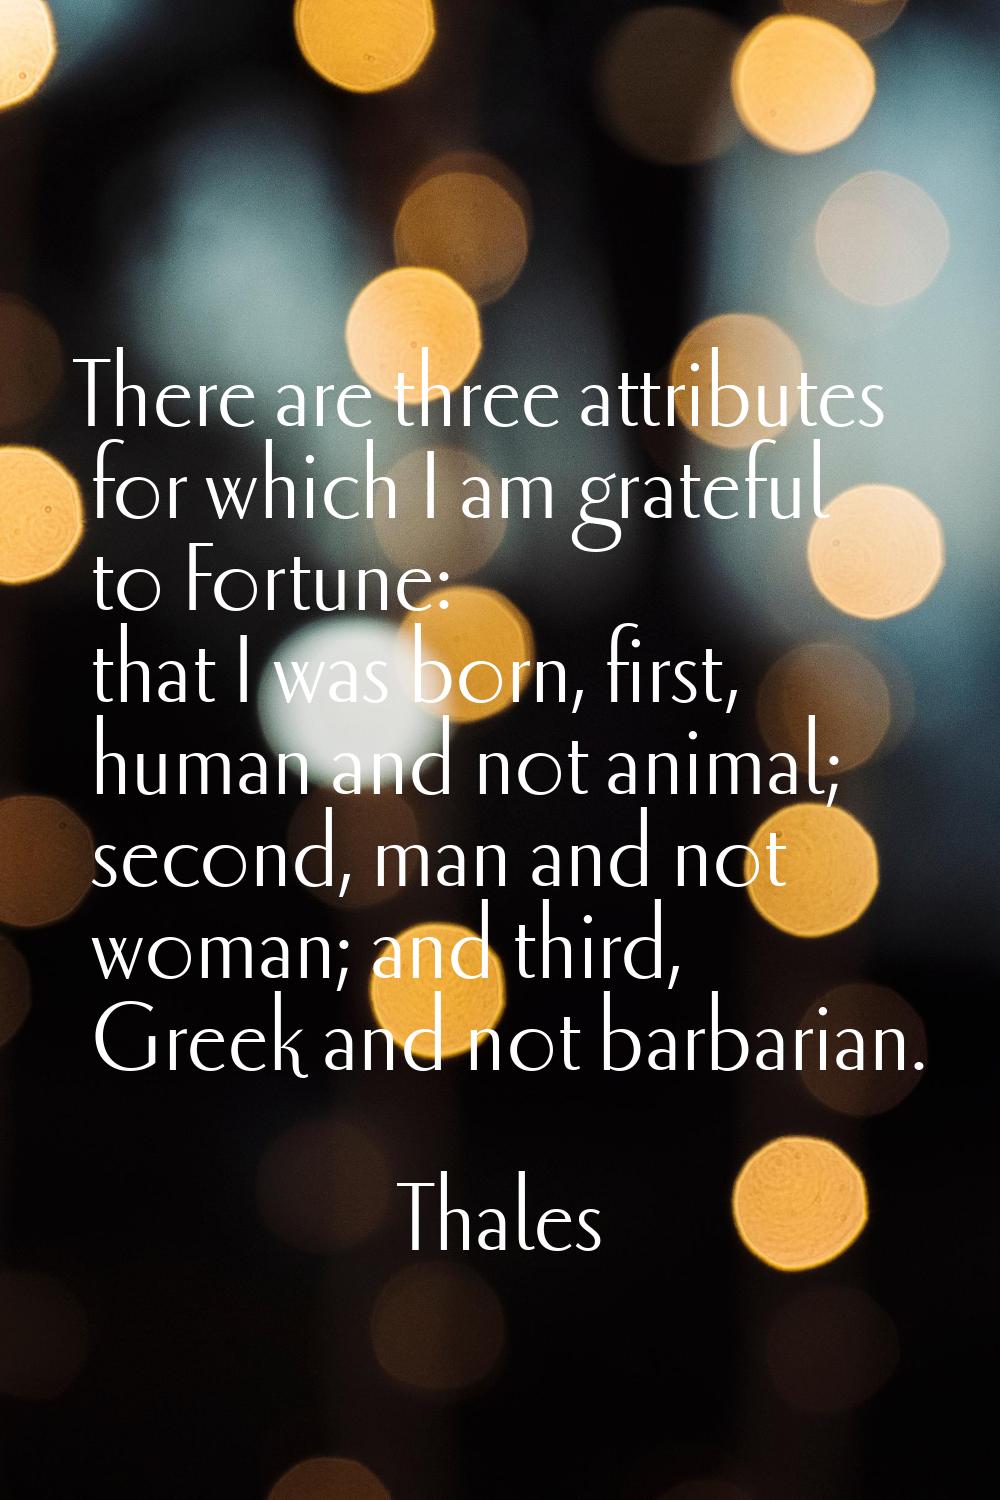 There are three attributes for which I am grateful to Fortune: that I was born, first, human and no